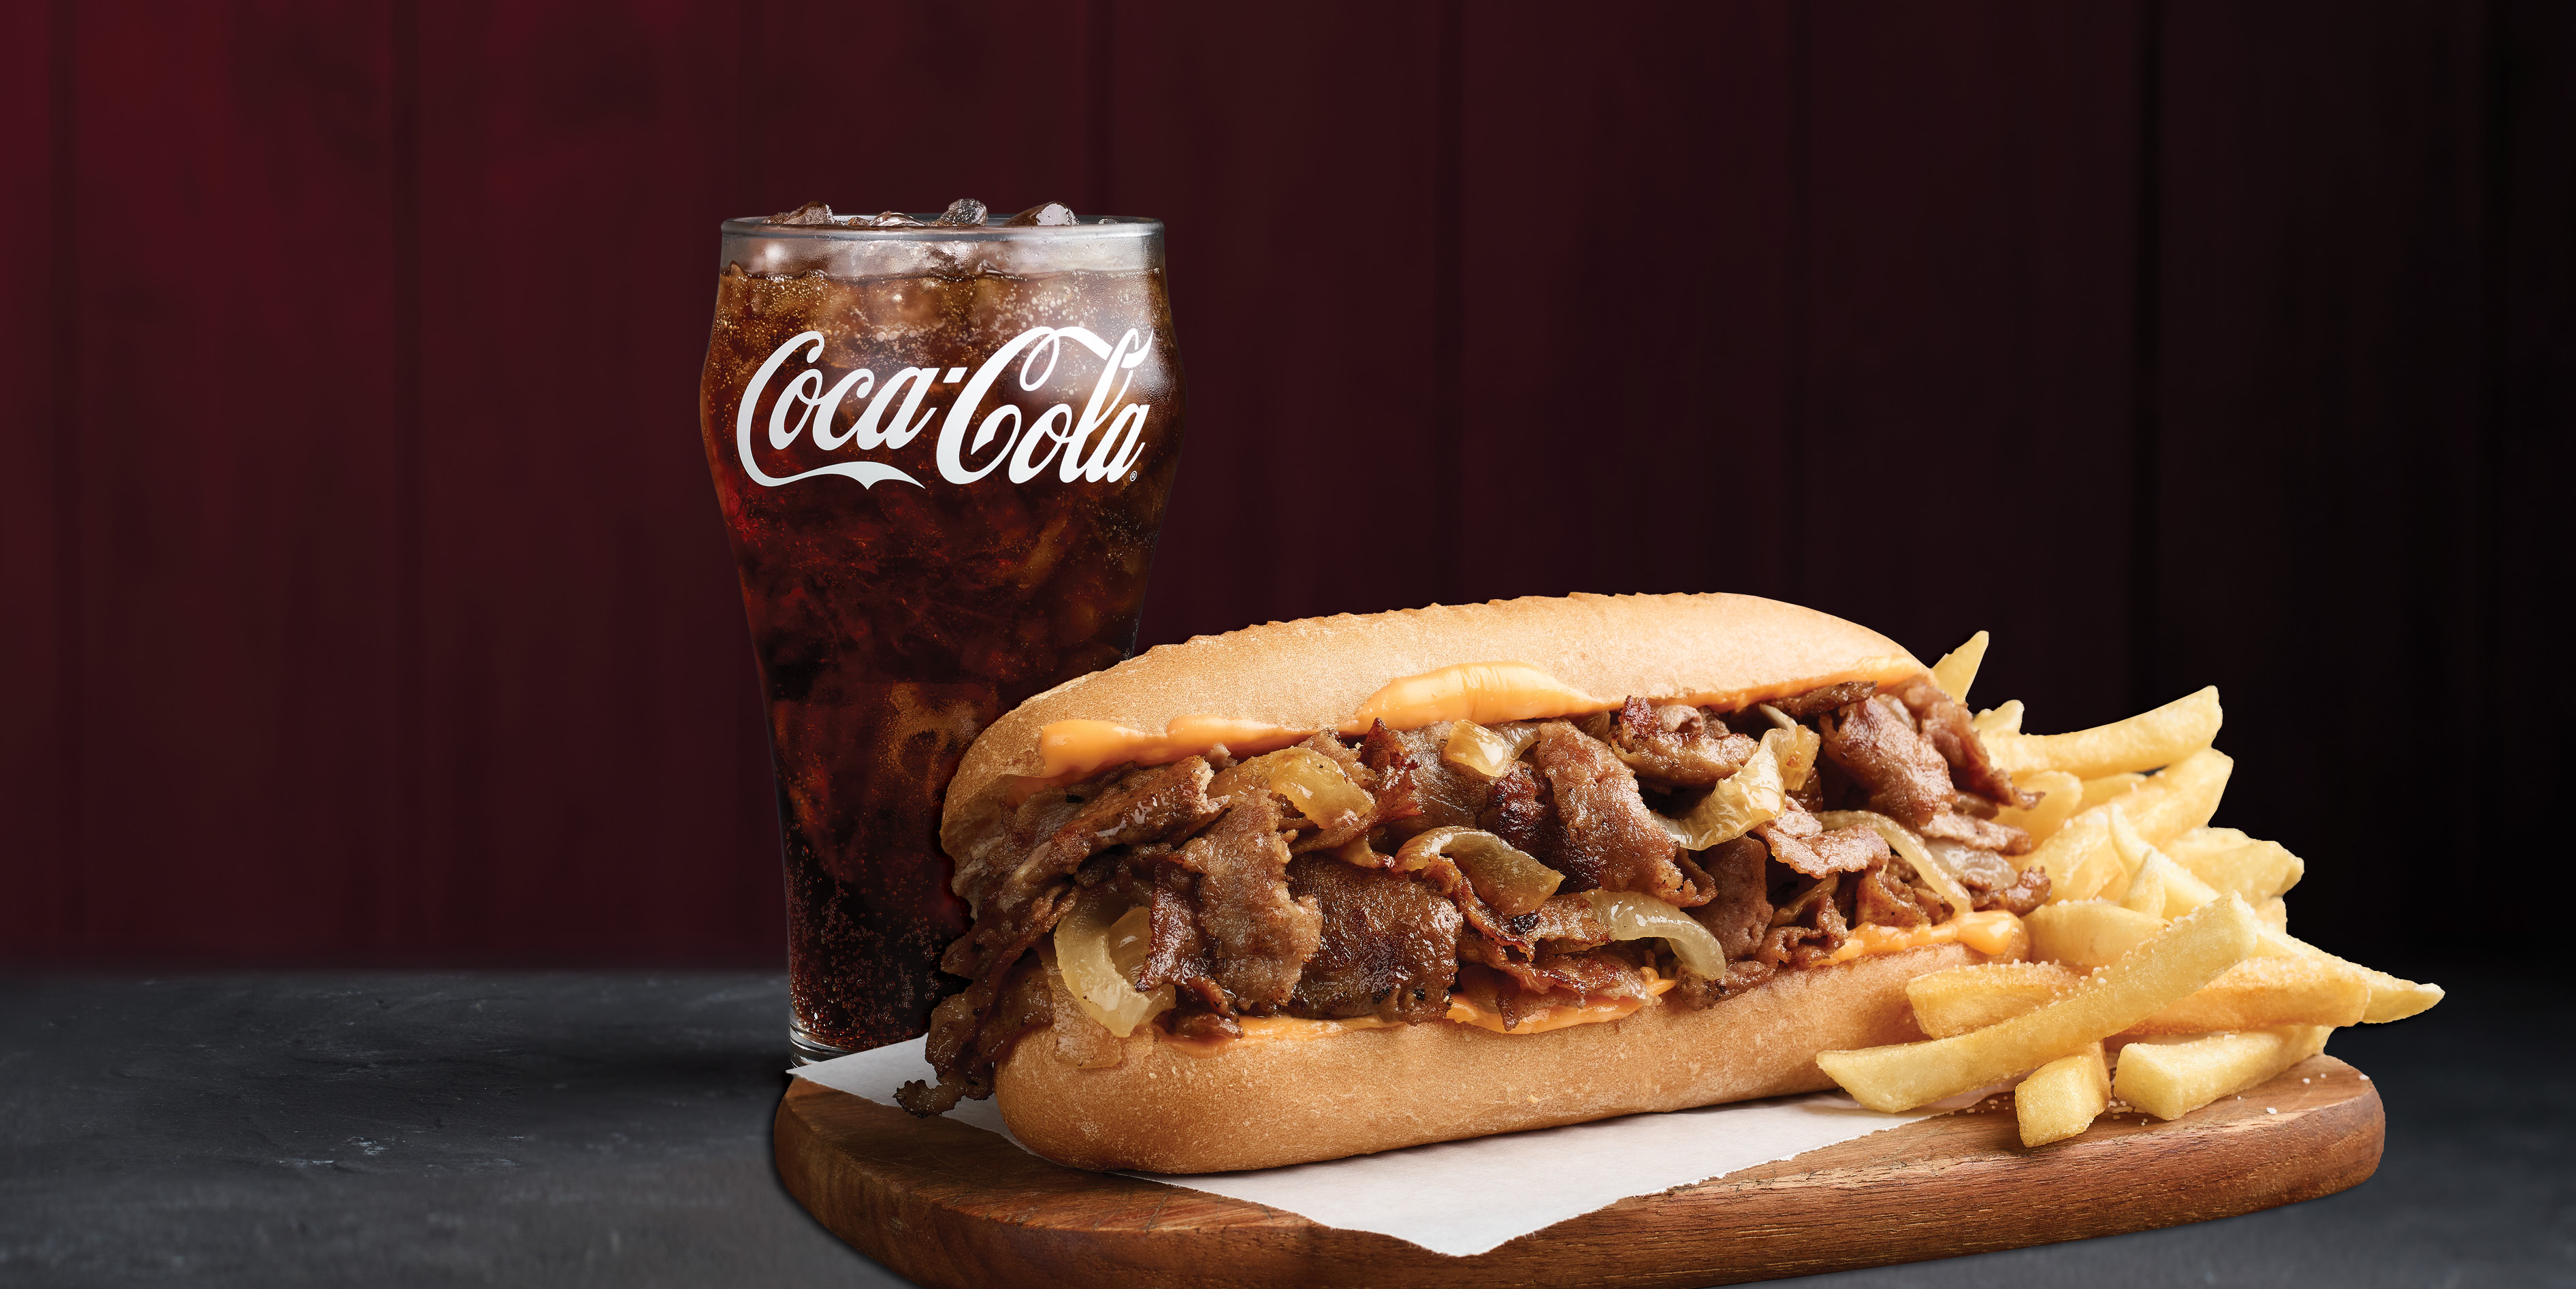 It's back! Our Steak and Cheese!